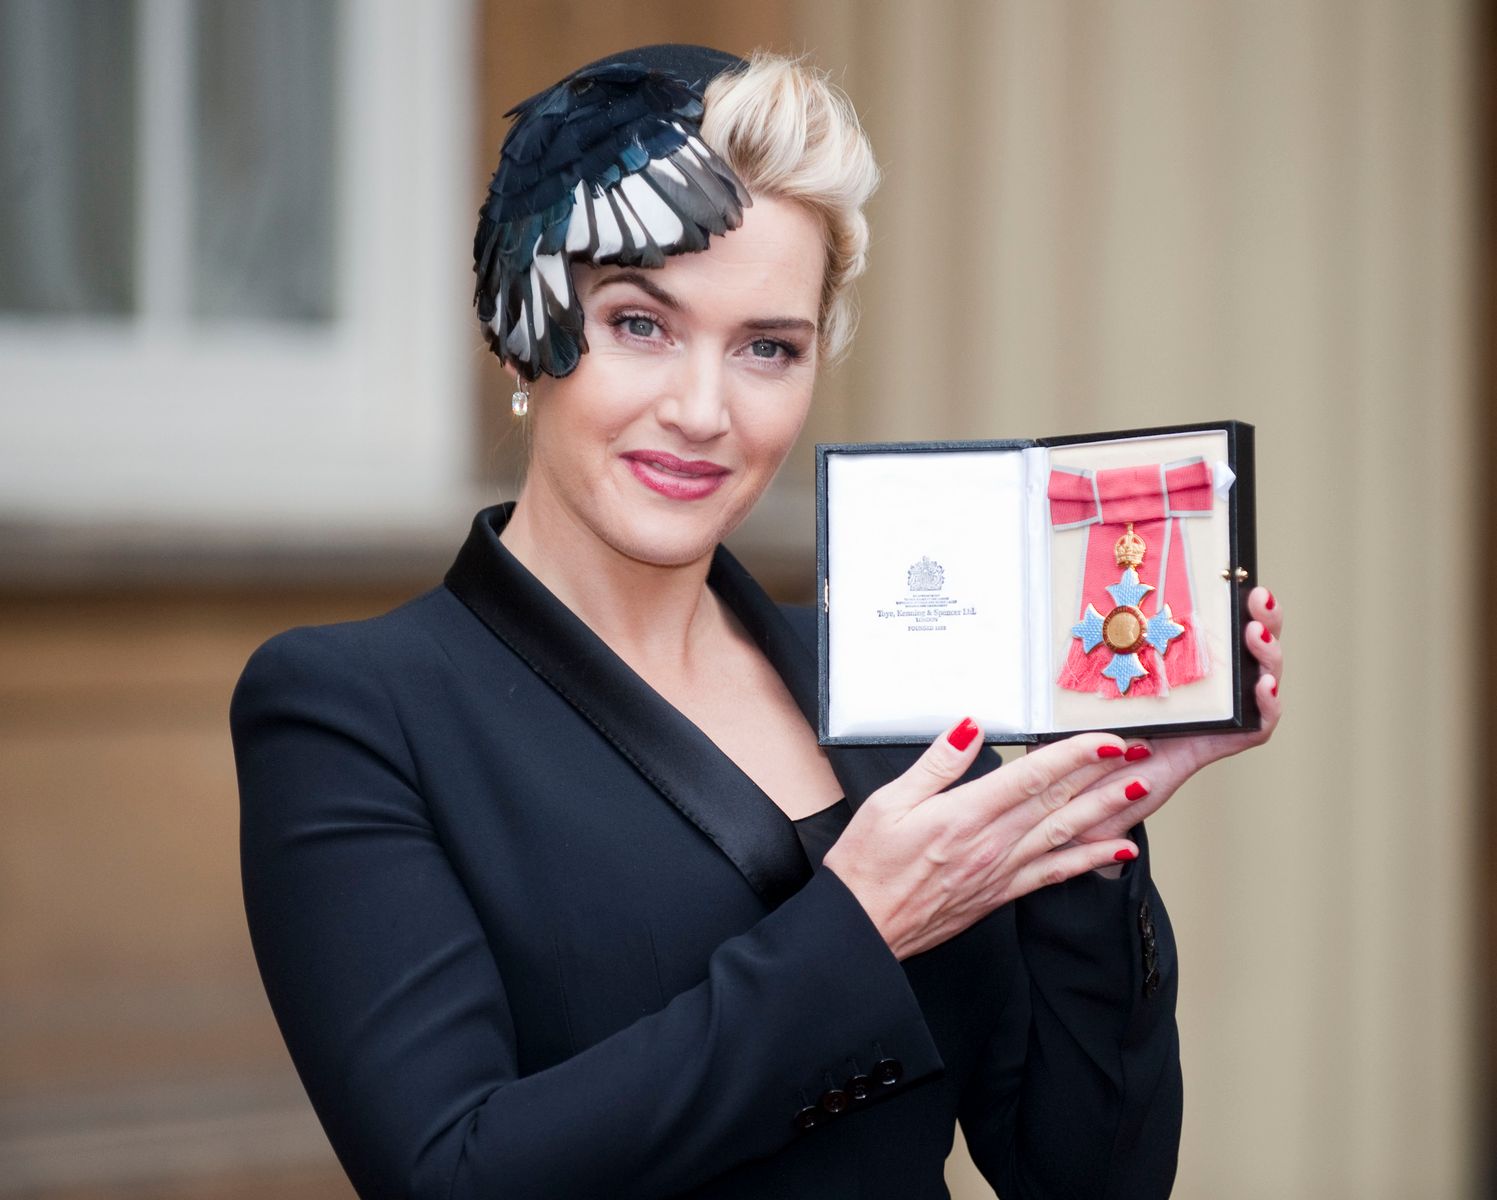 Kate Winslet holds her CBE, which was awarded to her by Queen Elizabeth II during an Investiture ceremony at Buckingham Palace on November 21, 2012. | Photo: Getty Images